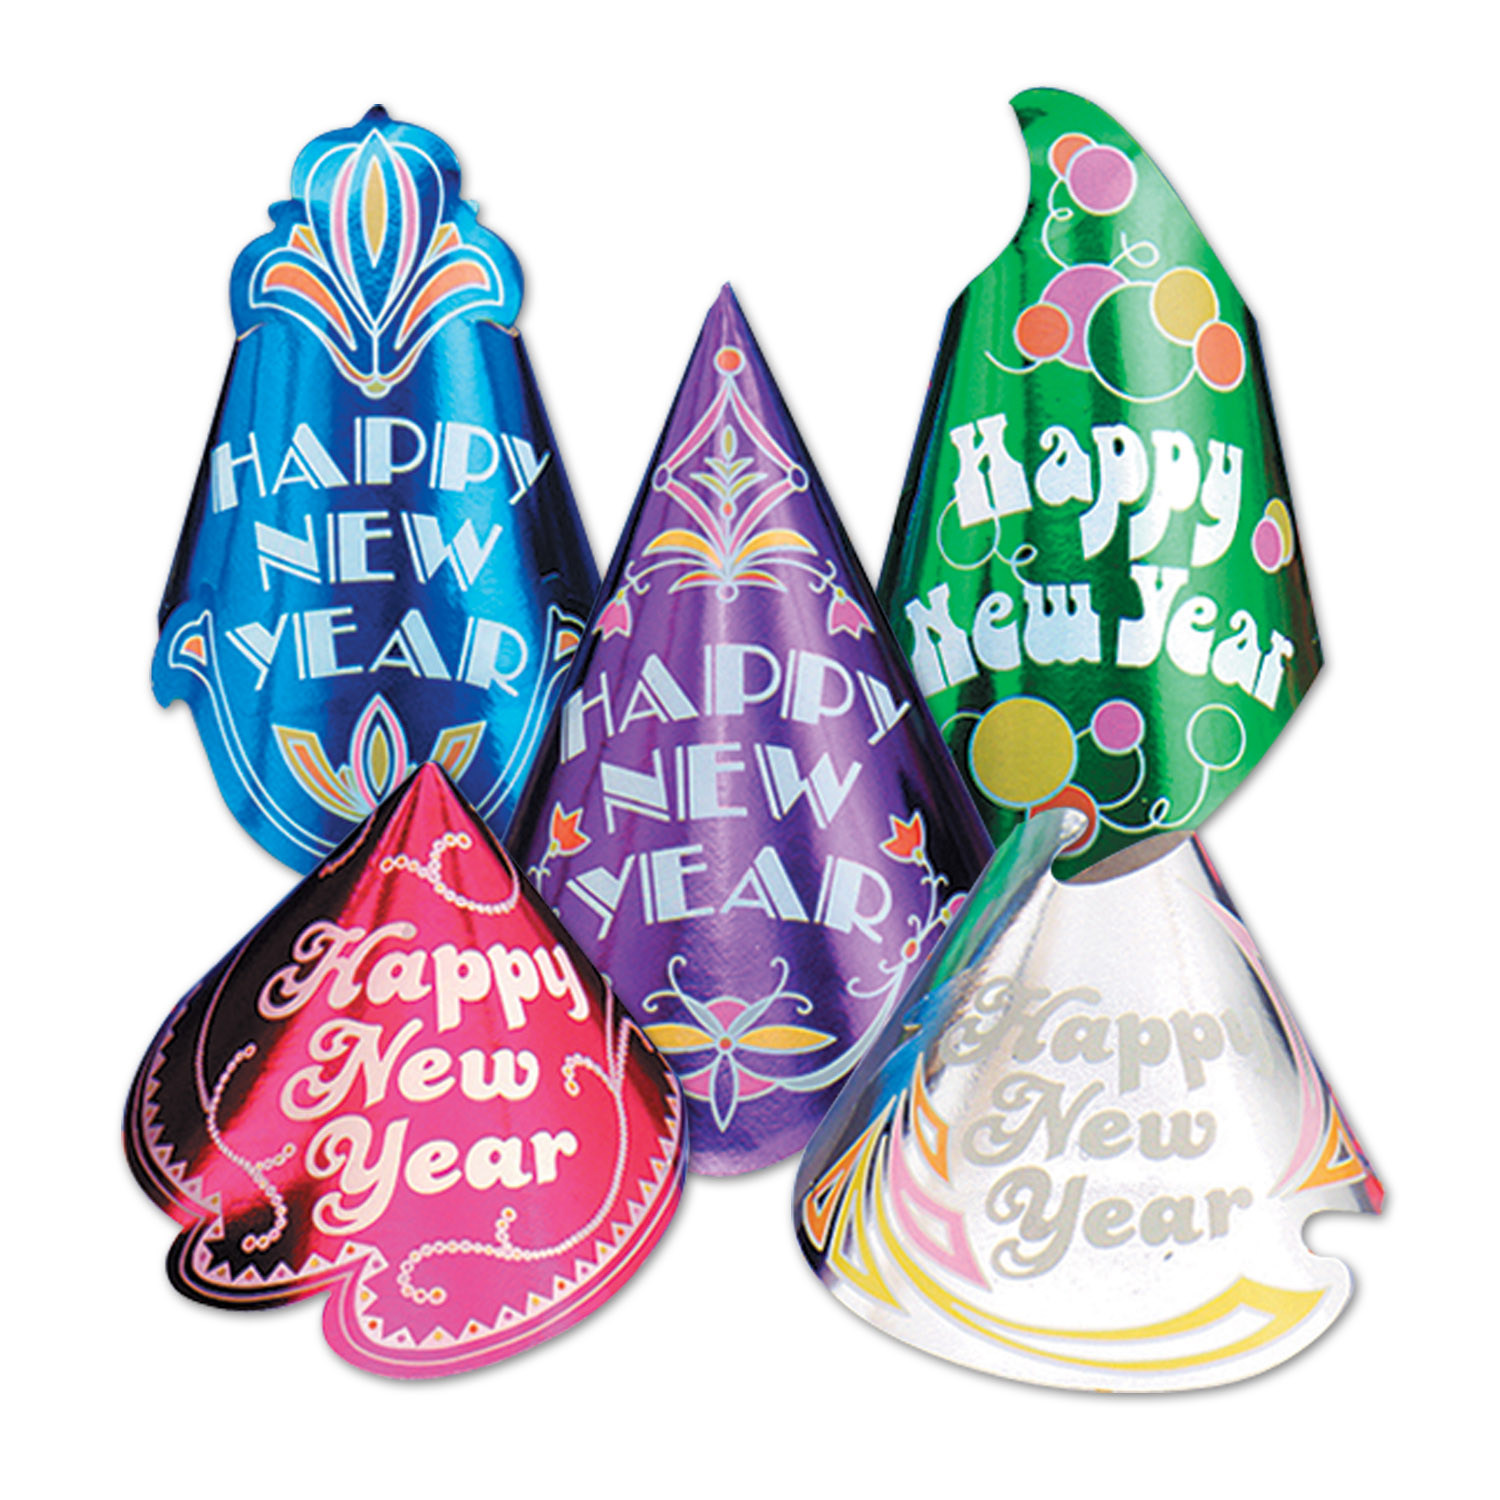 party hats for New Years Eve in bright colors and assorted designs